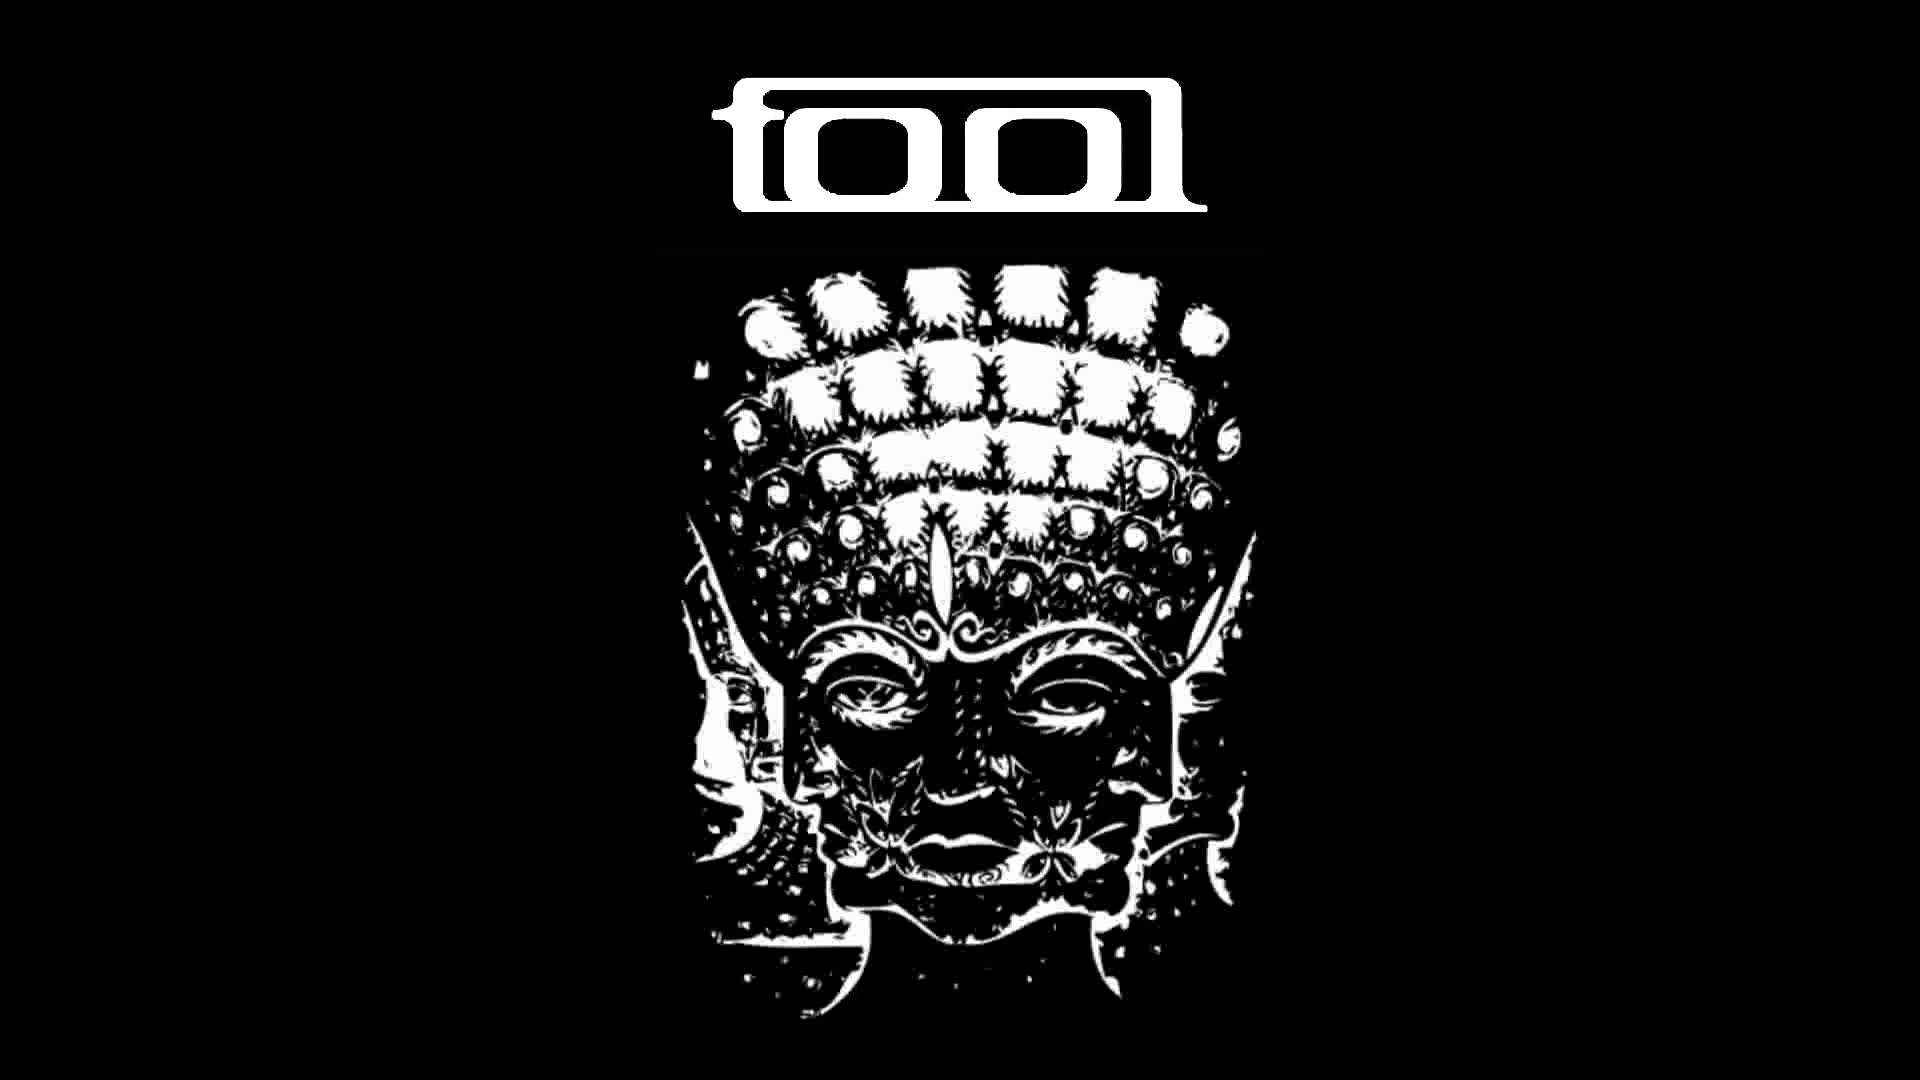 Tool Pictures Hq Wallpaper Data Src Top Rage